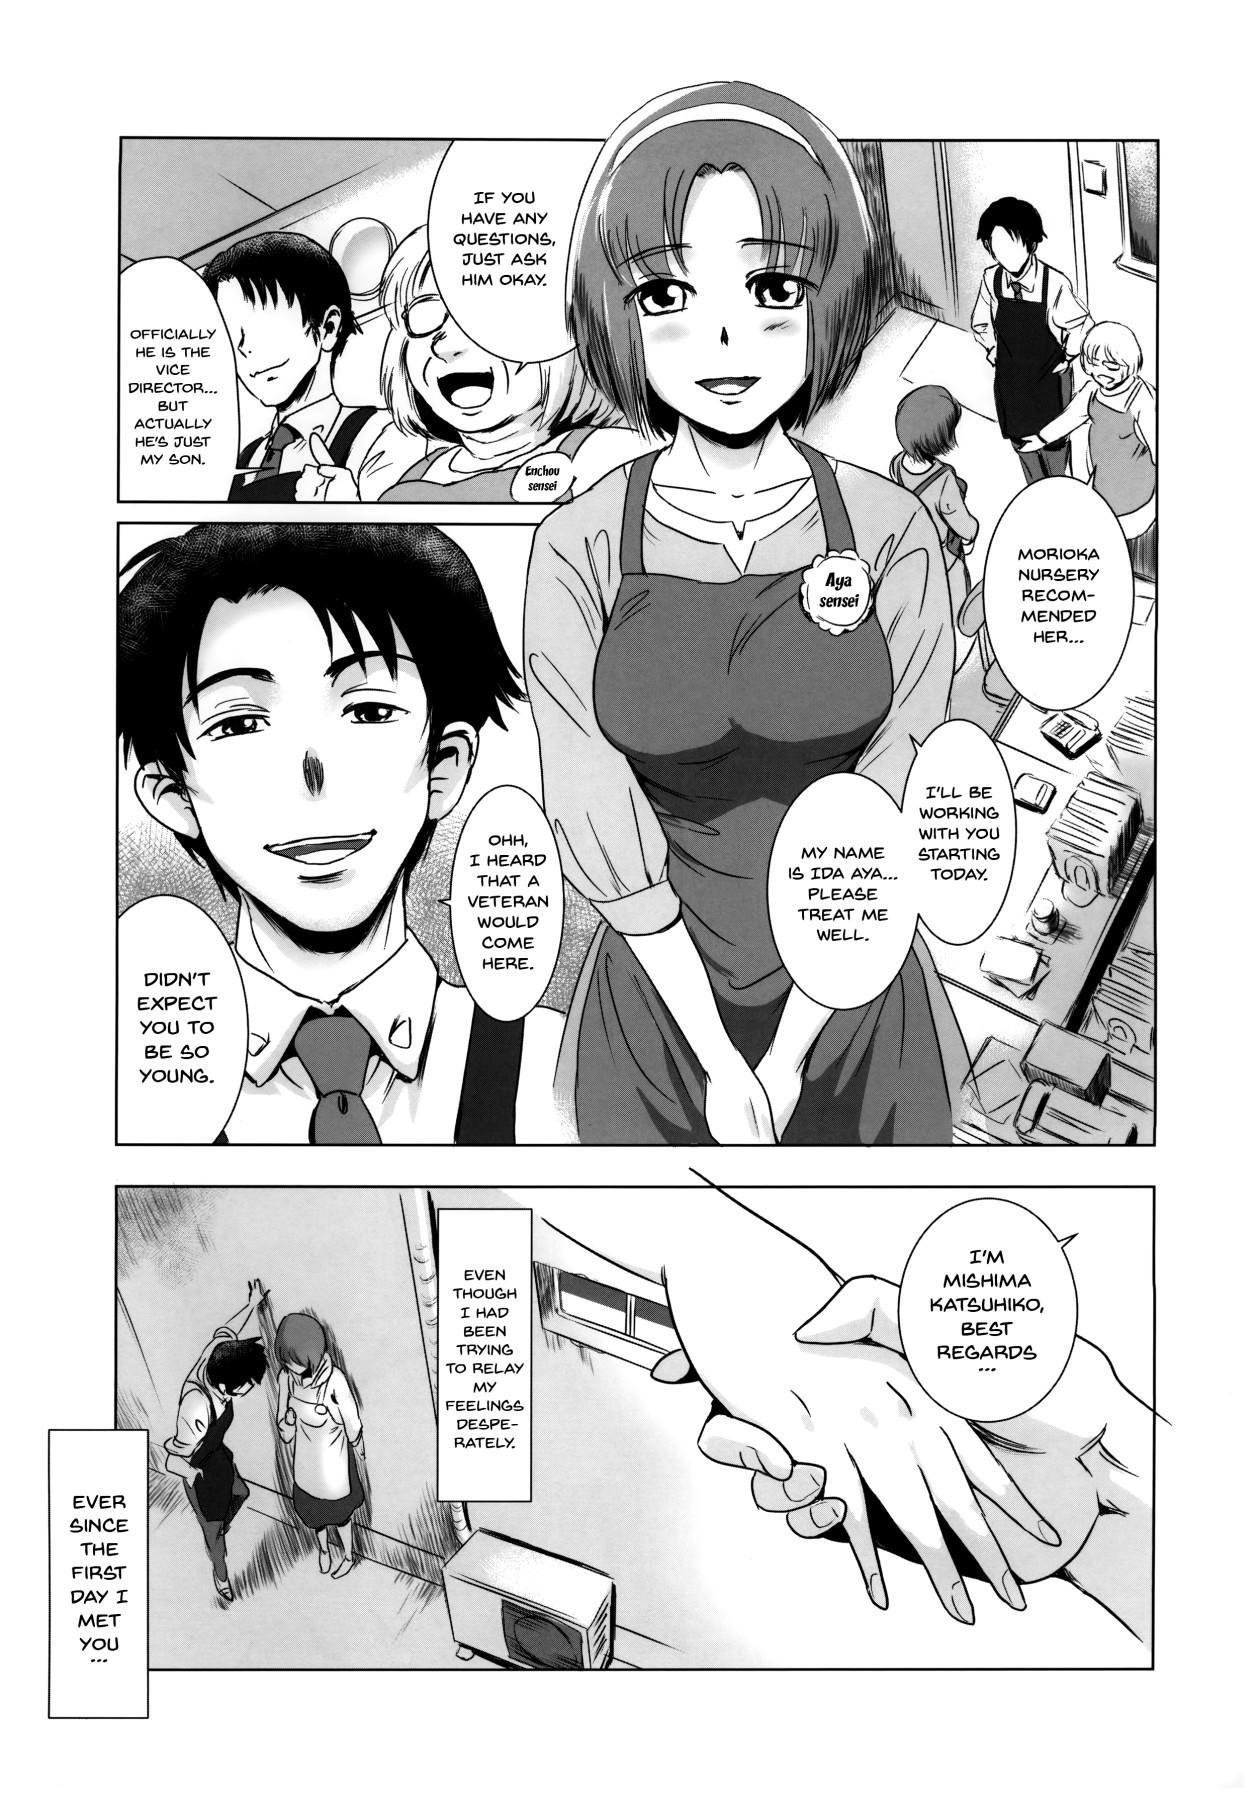 Spit Story of the 'N' Situation - Situation#1 Kyouhaku - Original Hermana - Page 8